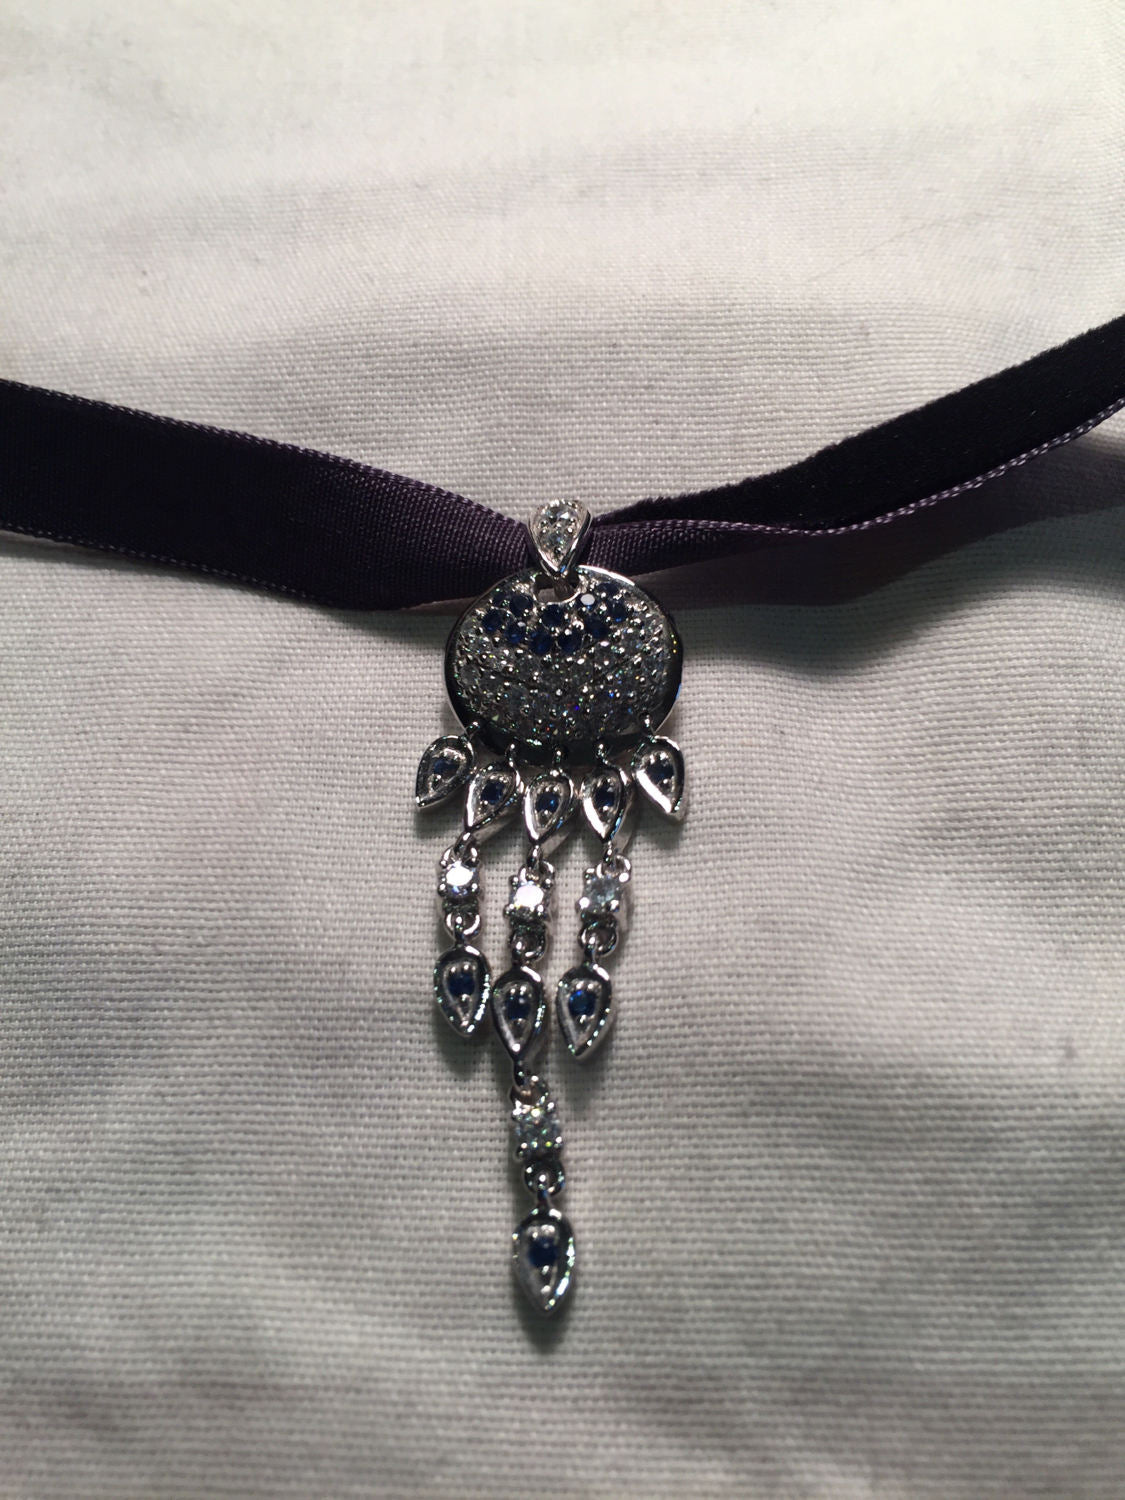 Vintage 925 Sterling Silver Sapphire and CZ Pendant